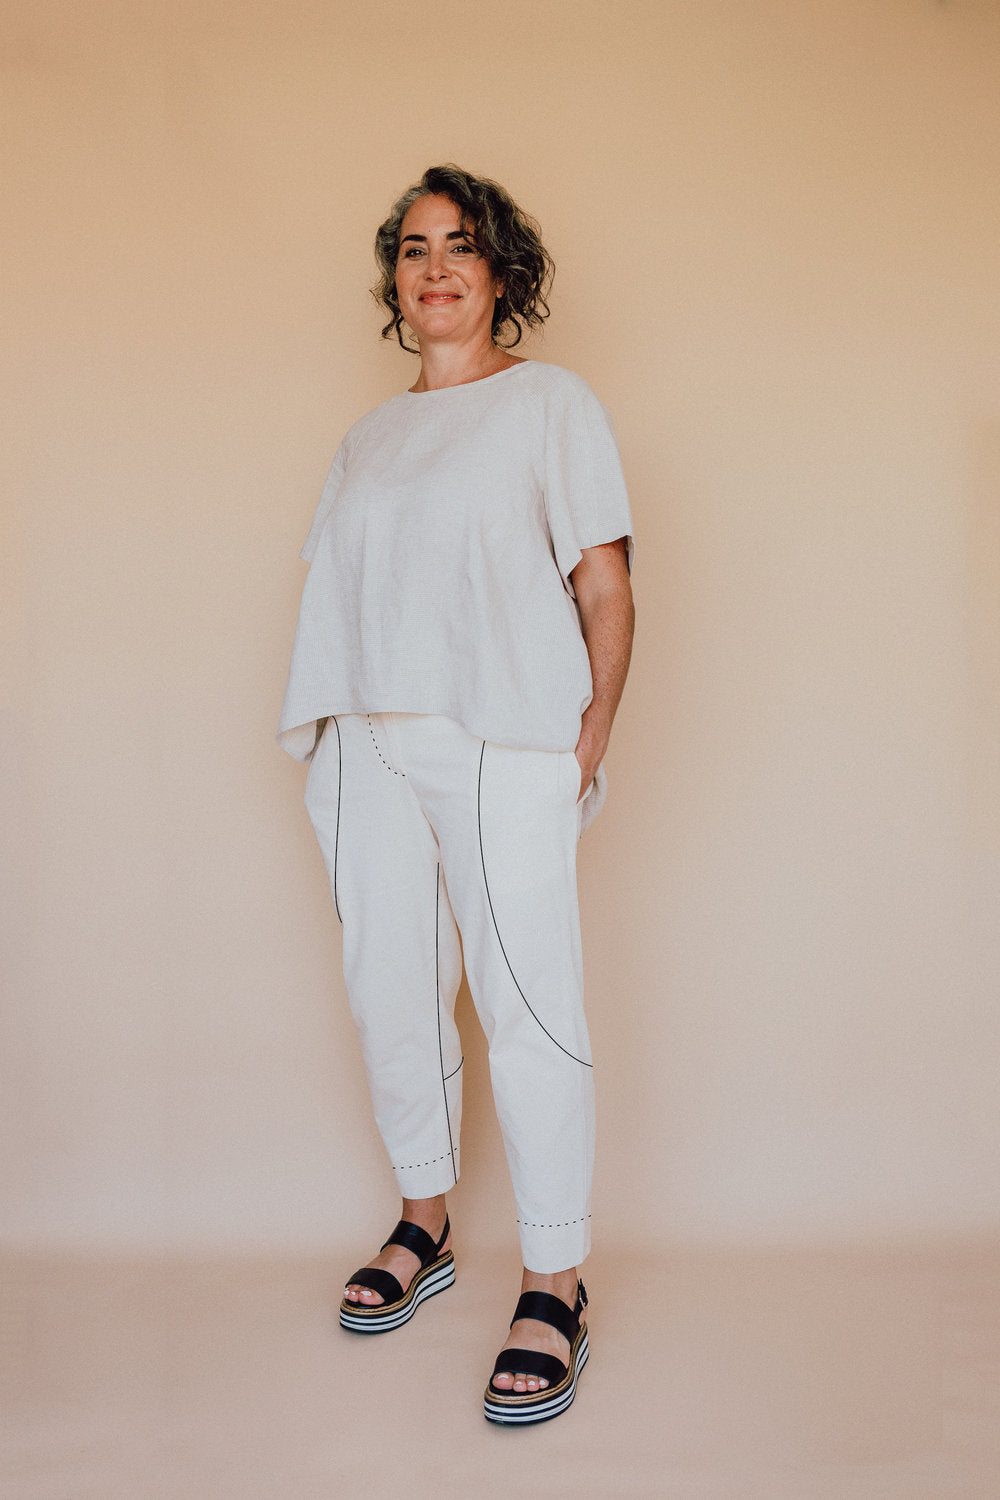 Woman wearing the Darlow Pants pattern from In the Folds on The Fold Line. A trouser pattern made in linen, linen blends, cotton drill/twill, denim, wool or silk fabrics, featuring a cropped length, tapered leg, fly front with zip closure, shaped waistban